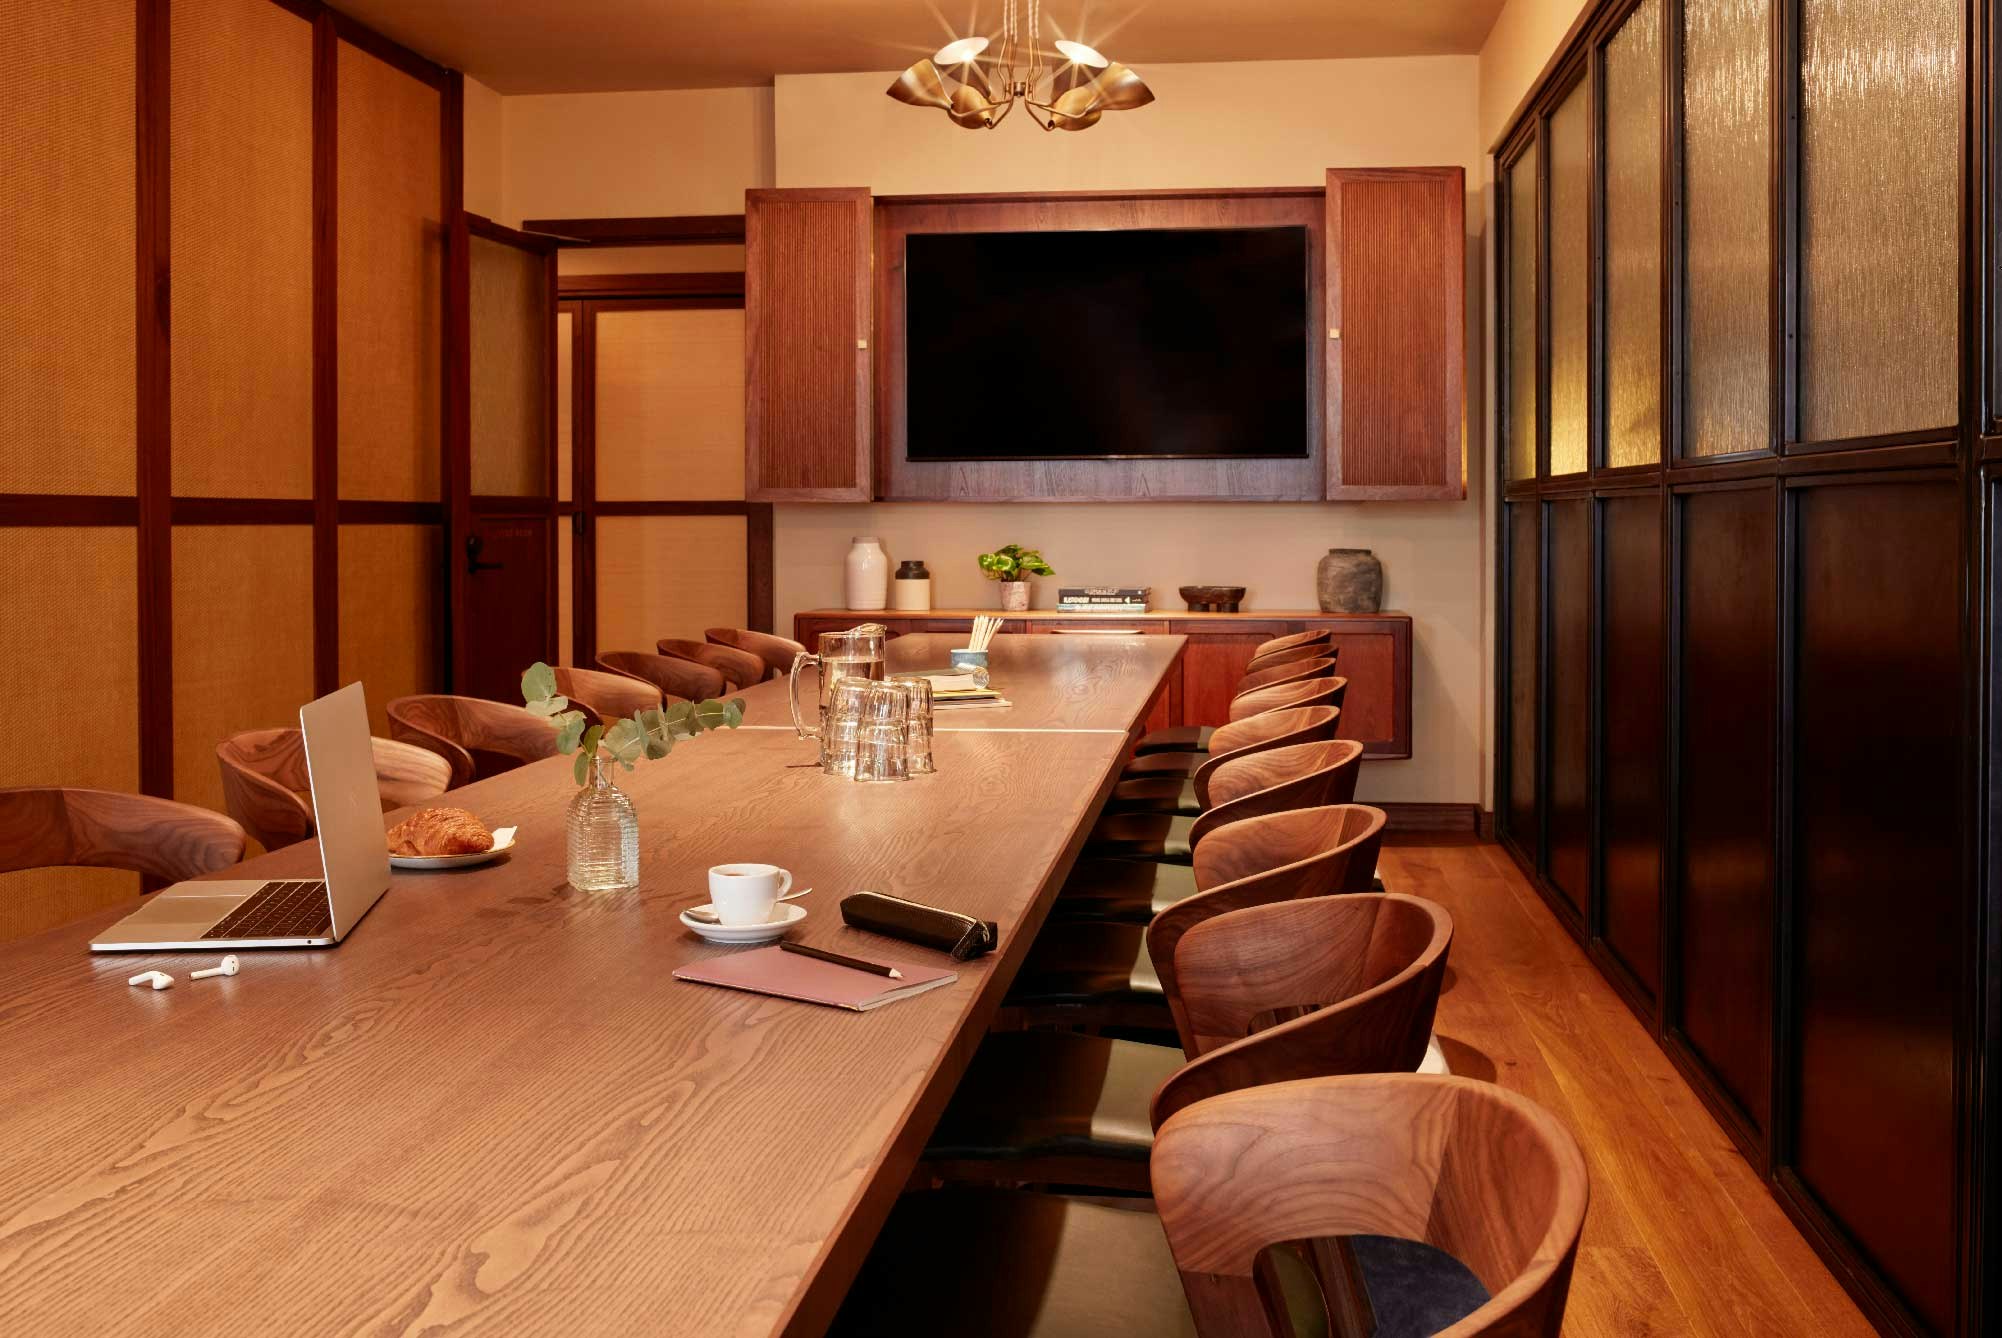 Hotel Meeting Rooms Venues in London - The Hoxton Holborn